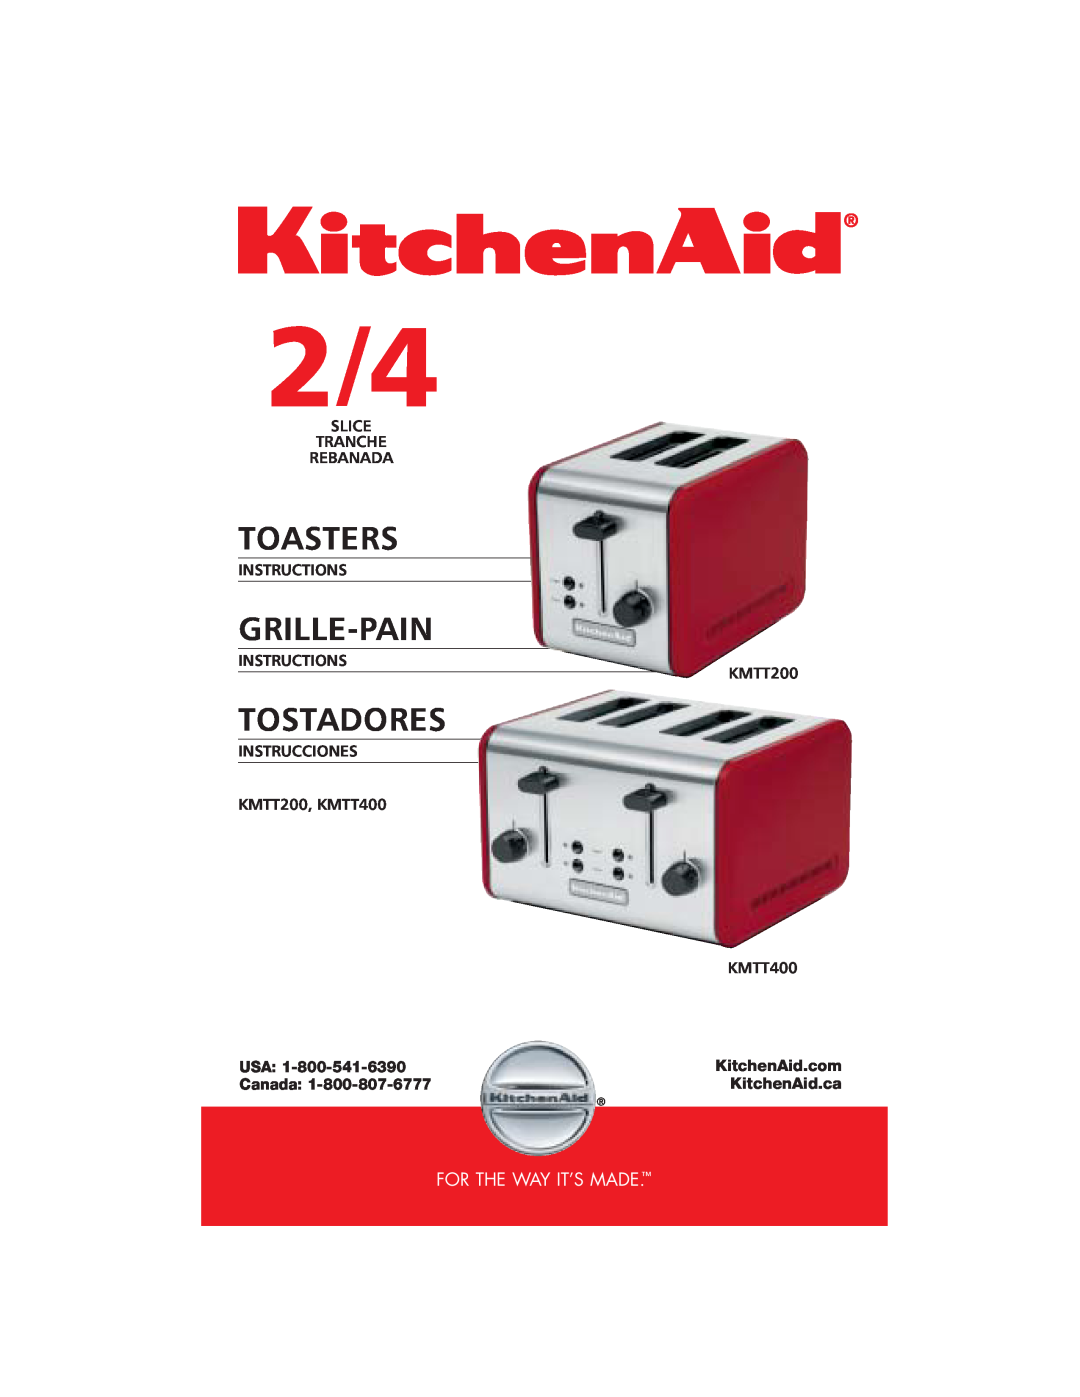 KitchenAid KMTT400 manual For The Way It’S Made, Toasters, Grille-Pain, Tostadores 